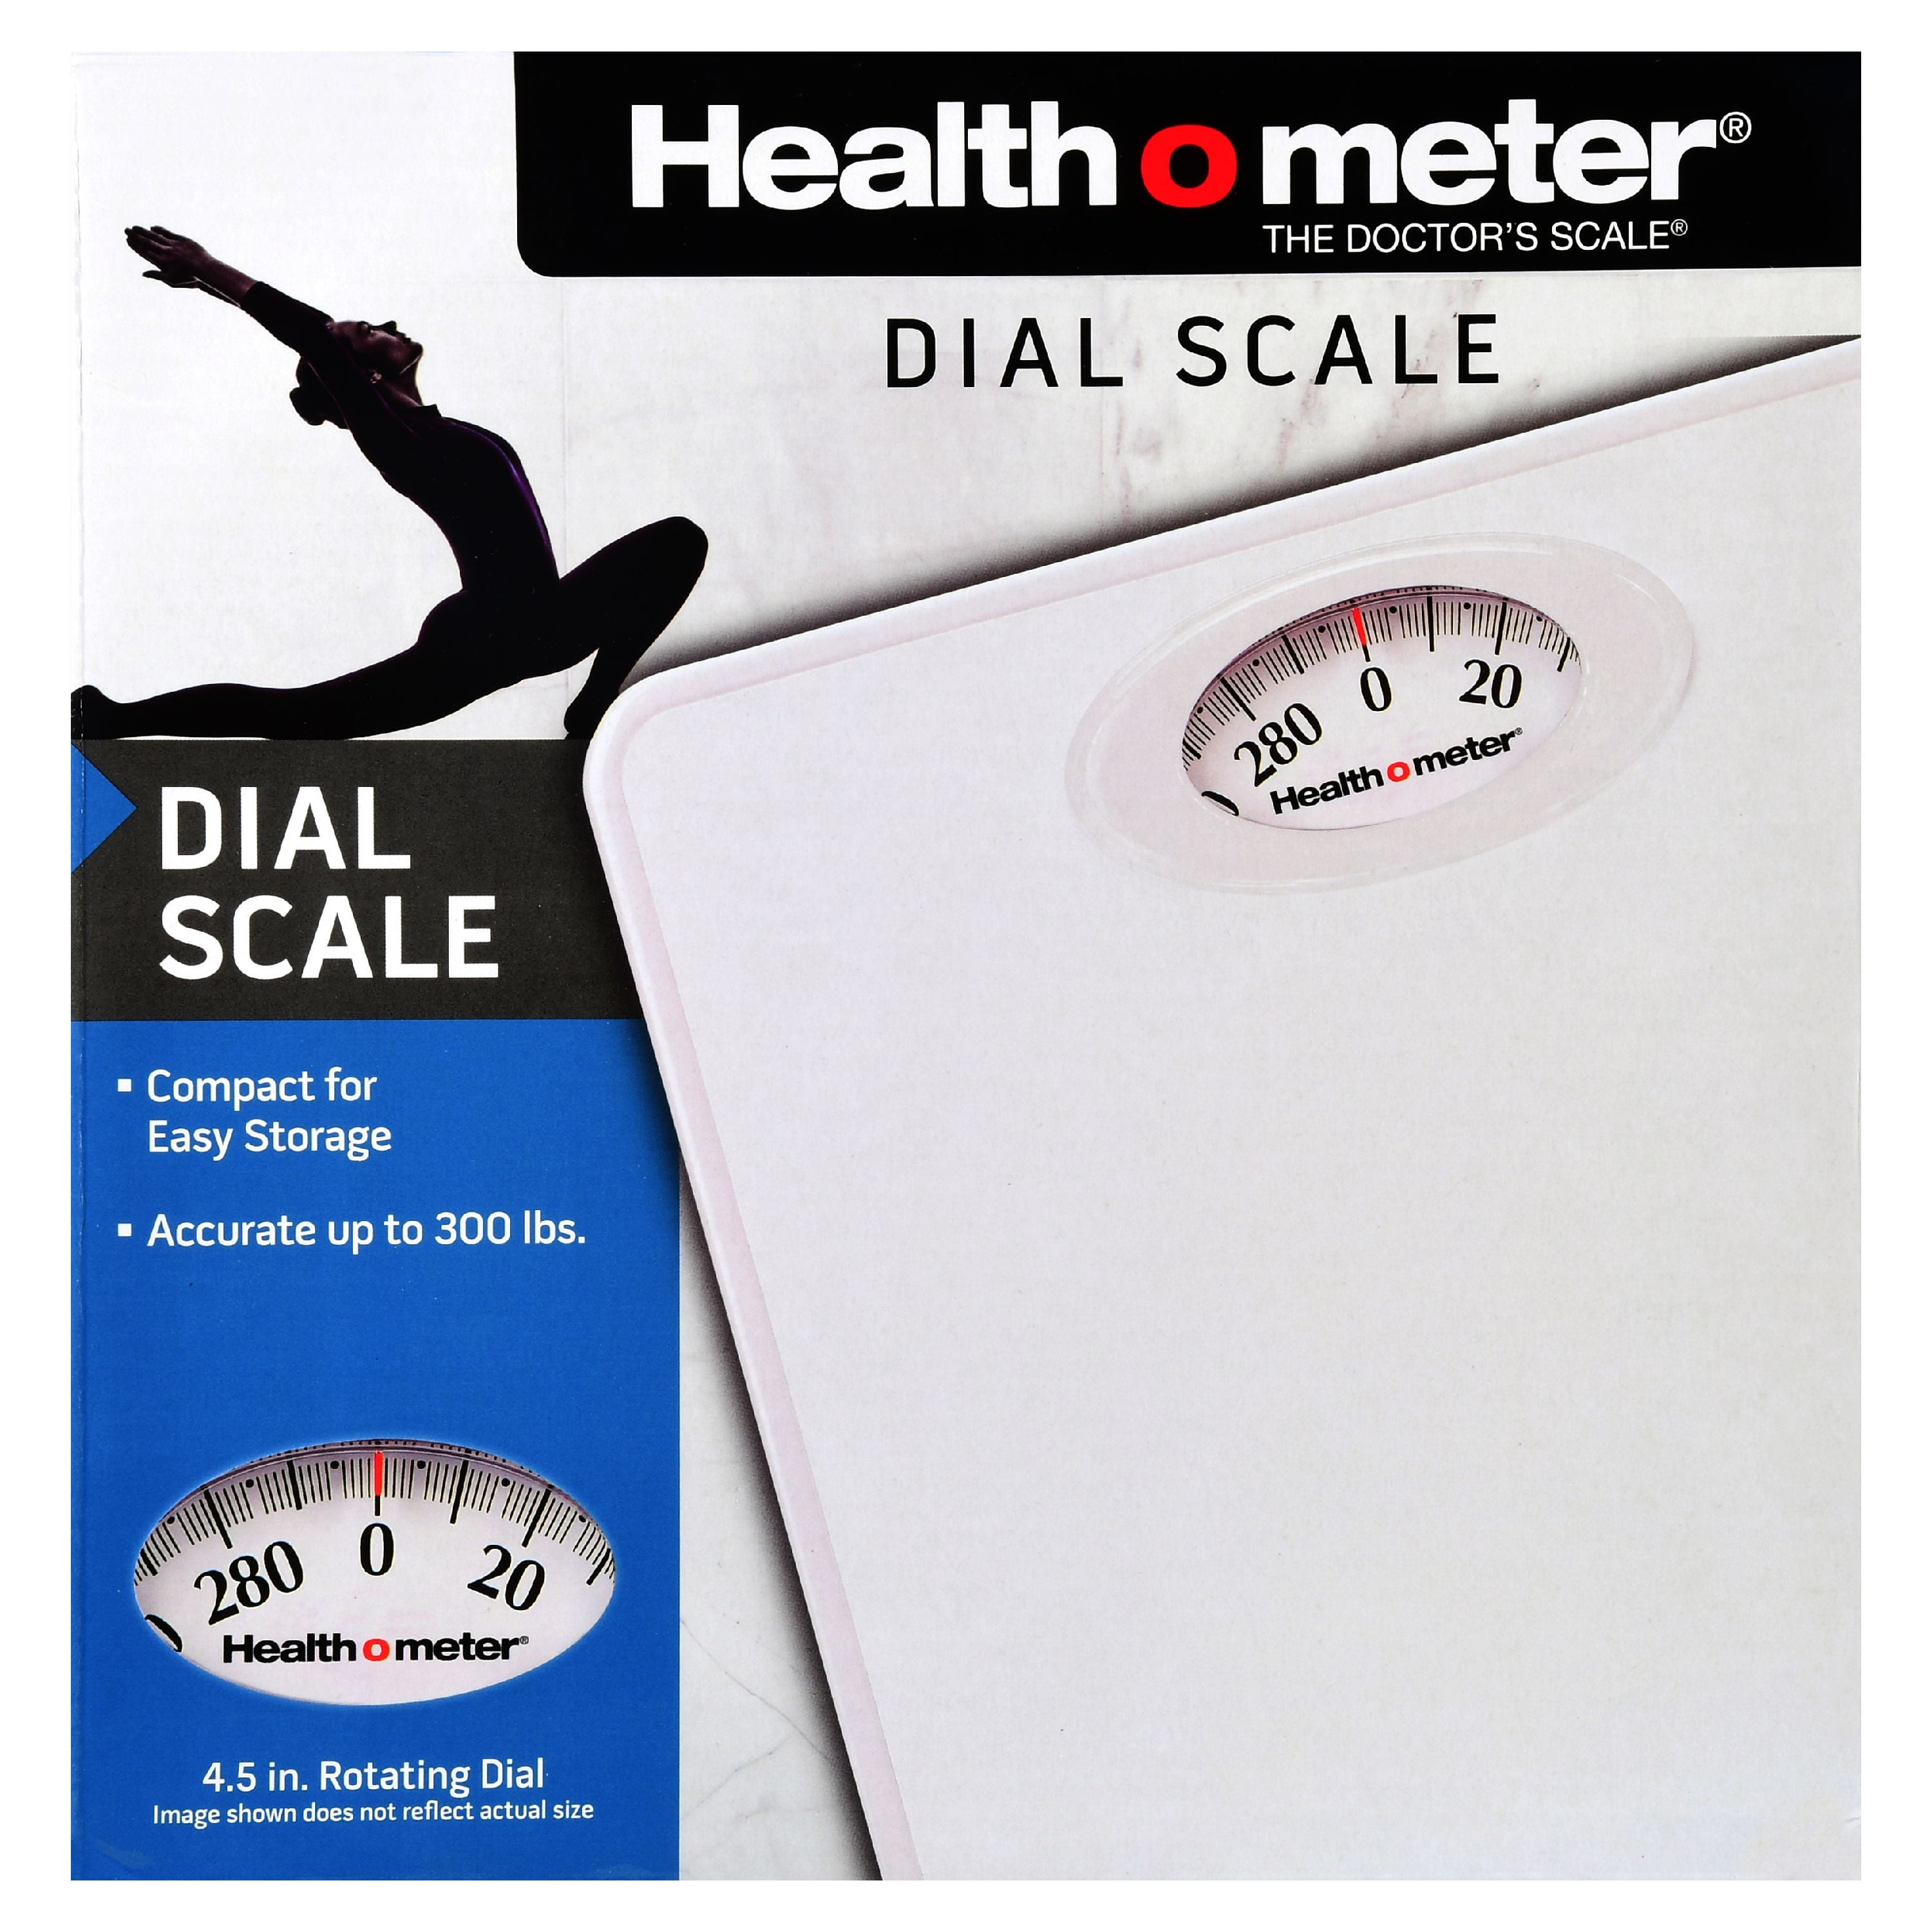 American Weigh Scales Achiever 396 Bathroom Scale - White - 396lbs